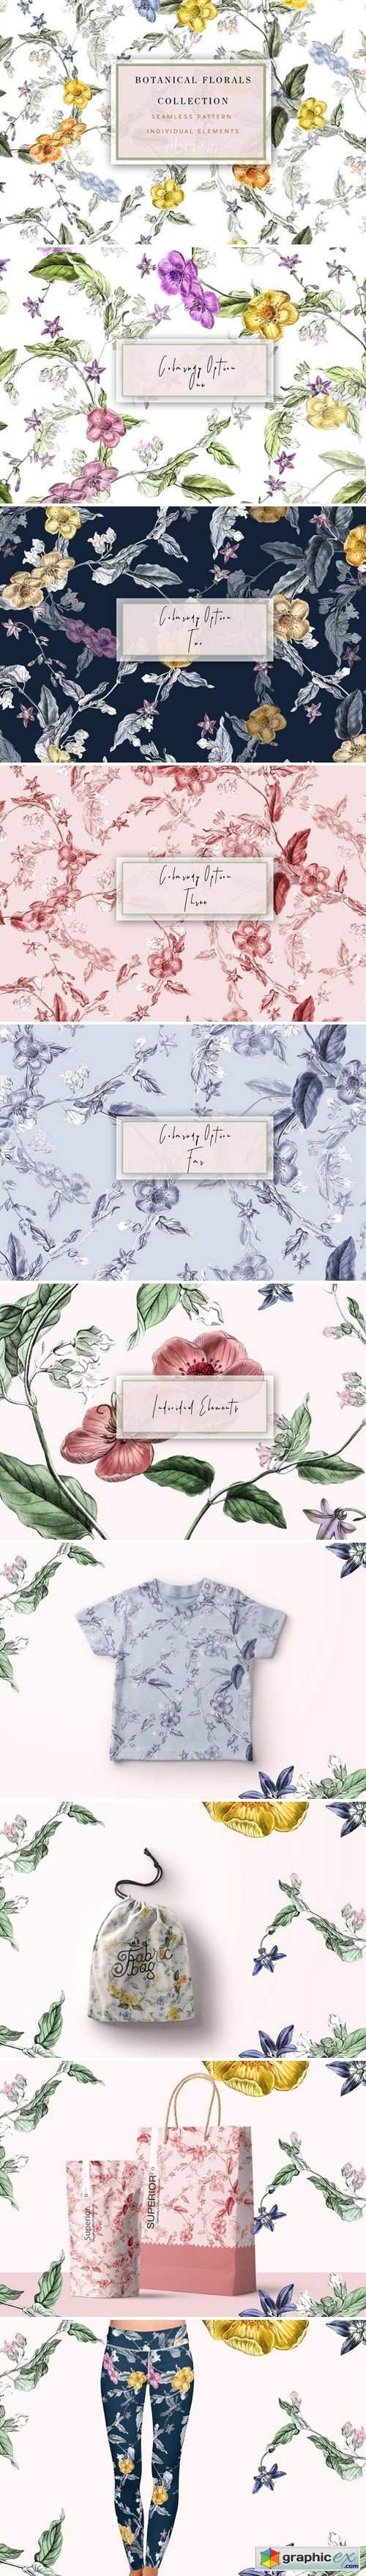 Botanical Flowers Collection